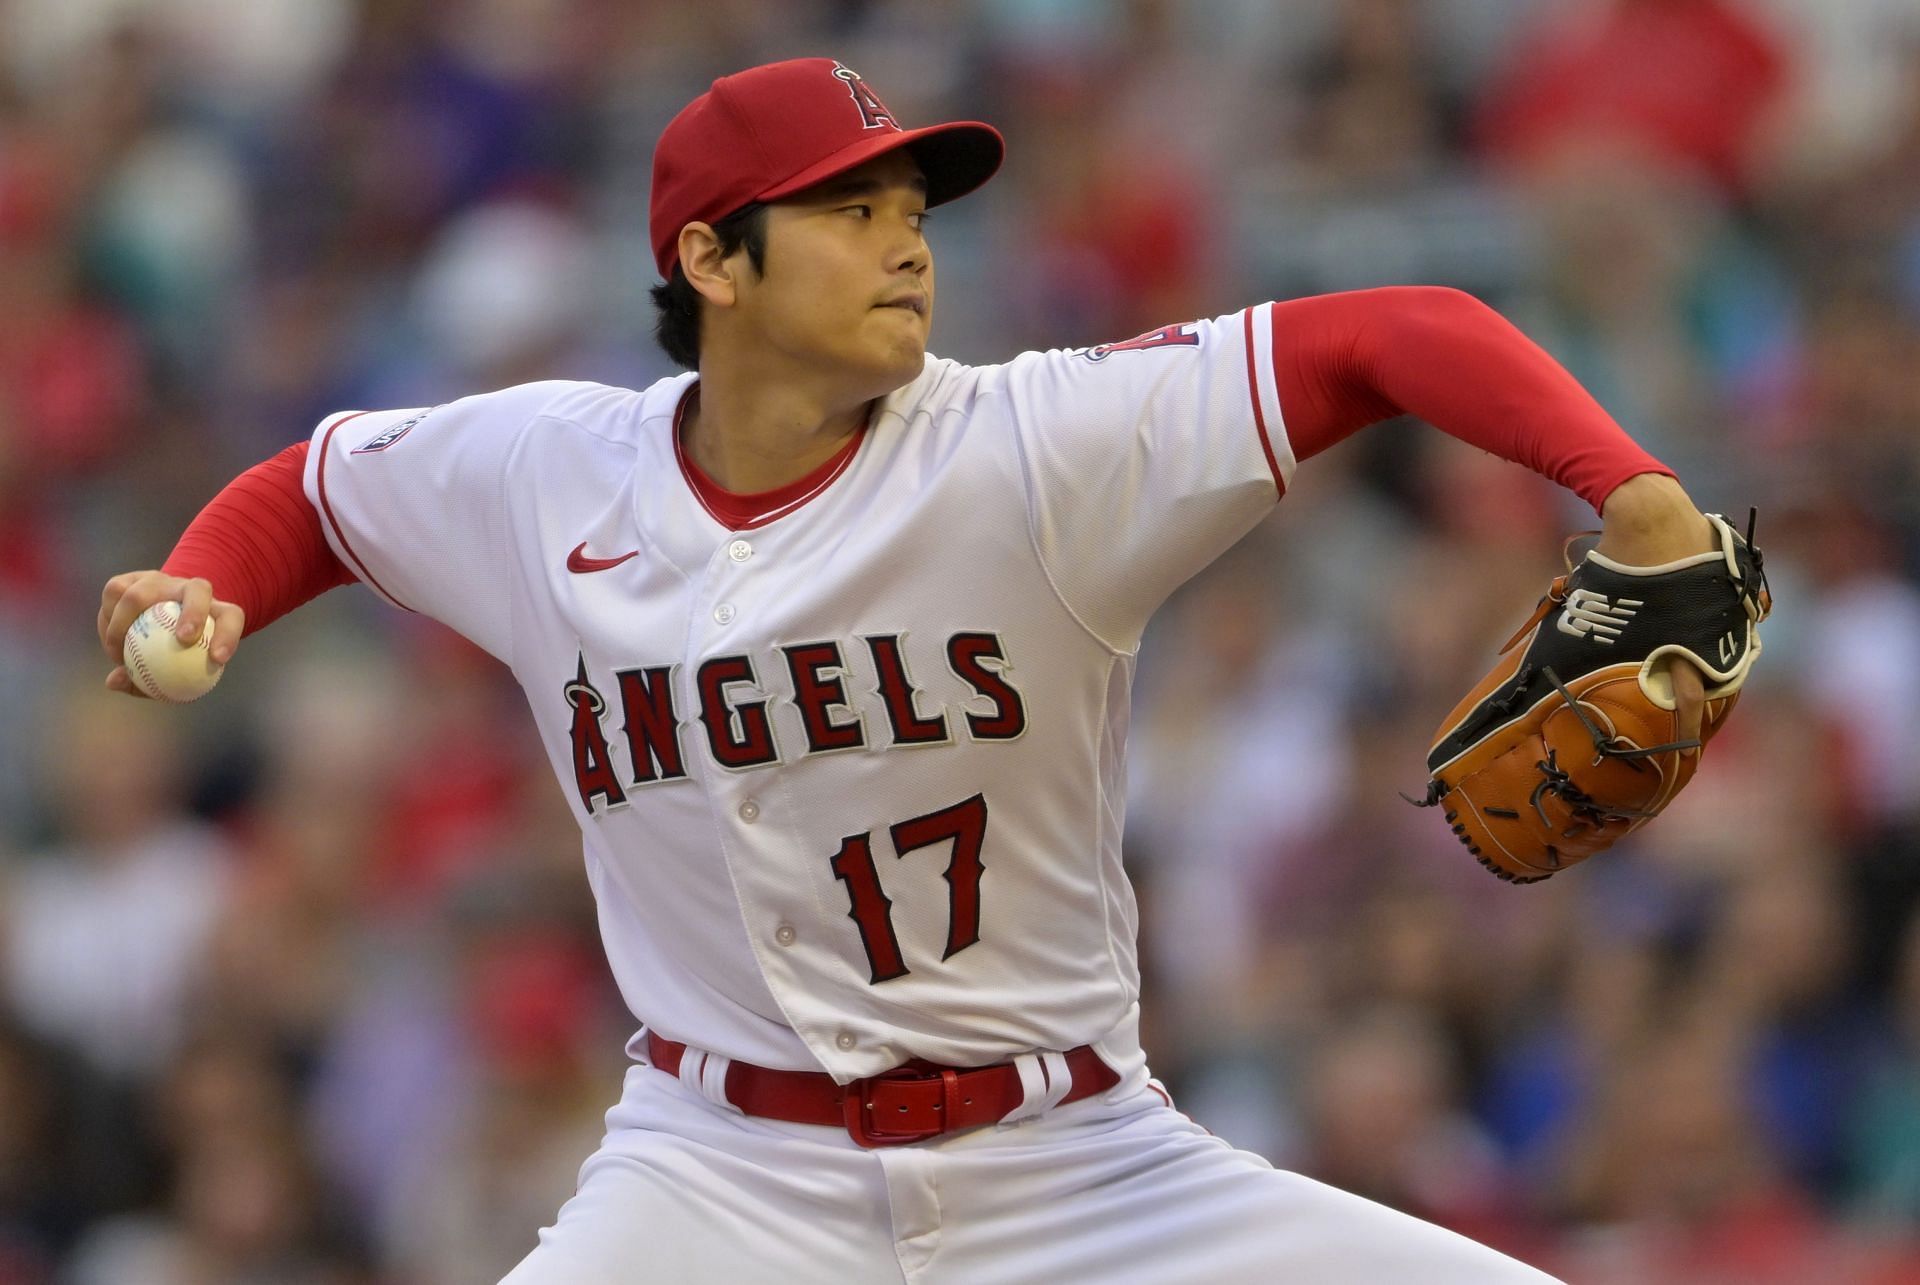 Shohei Ohtani of the Los Angeles Angels throws against the Seattle Mariners at Angel Stadium of Anaheim